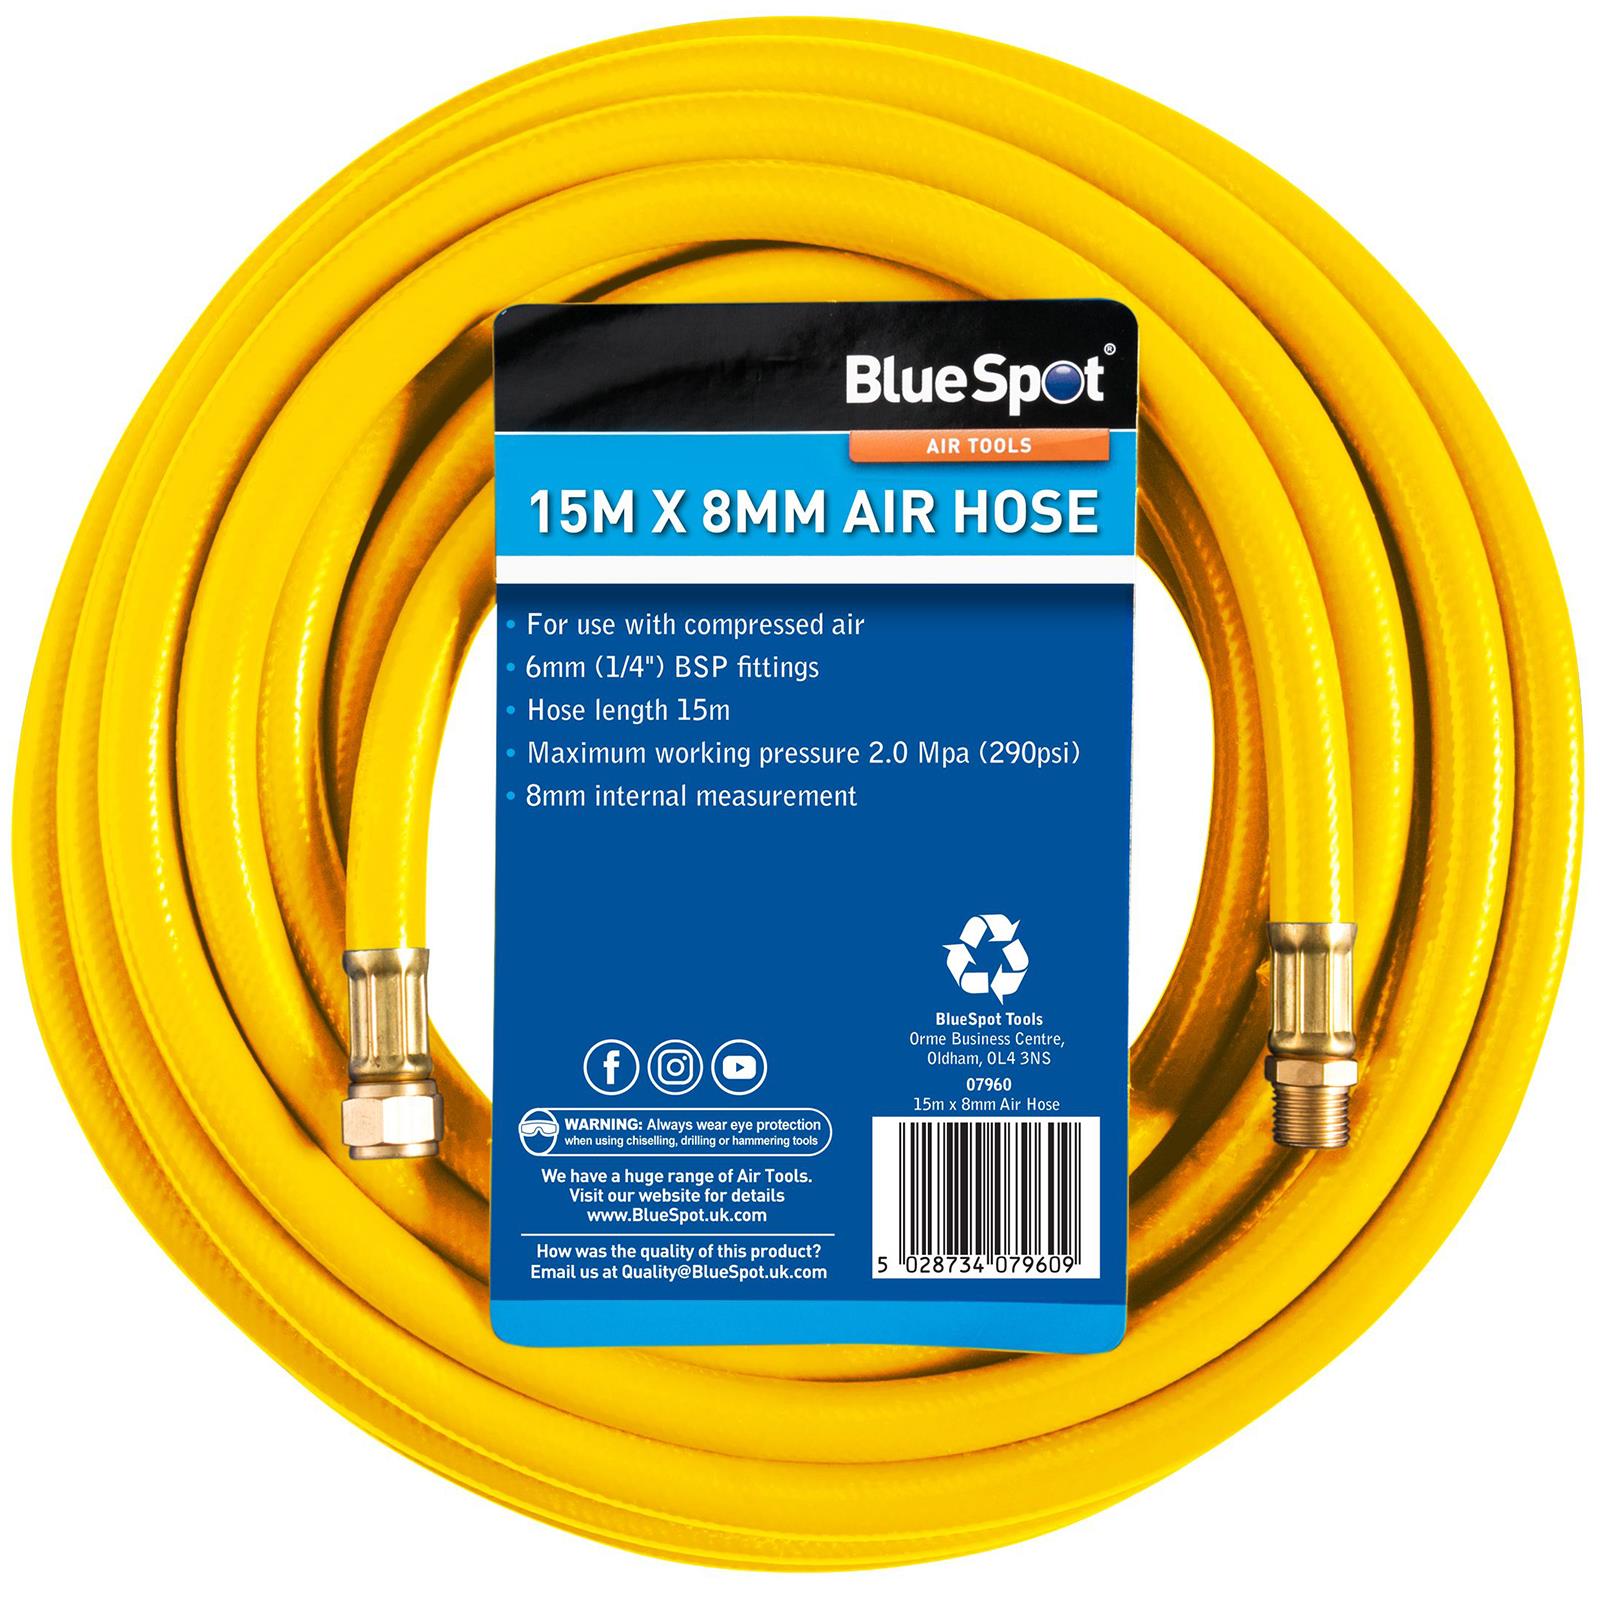 BlueSpot Air Hose 15m x 8mm with 1/4" BSP Fittings Reinforced Rubber